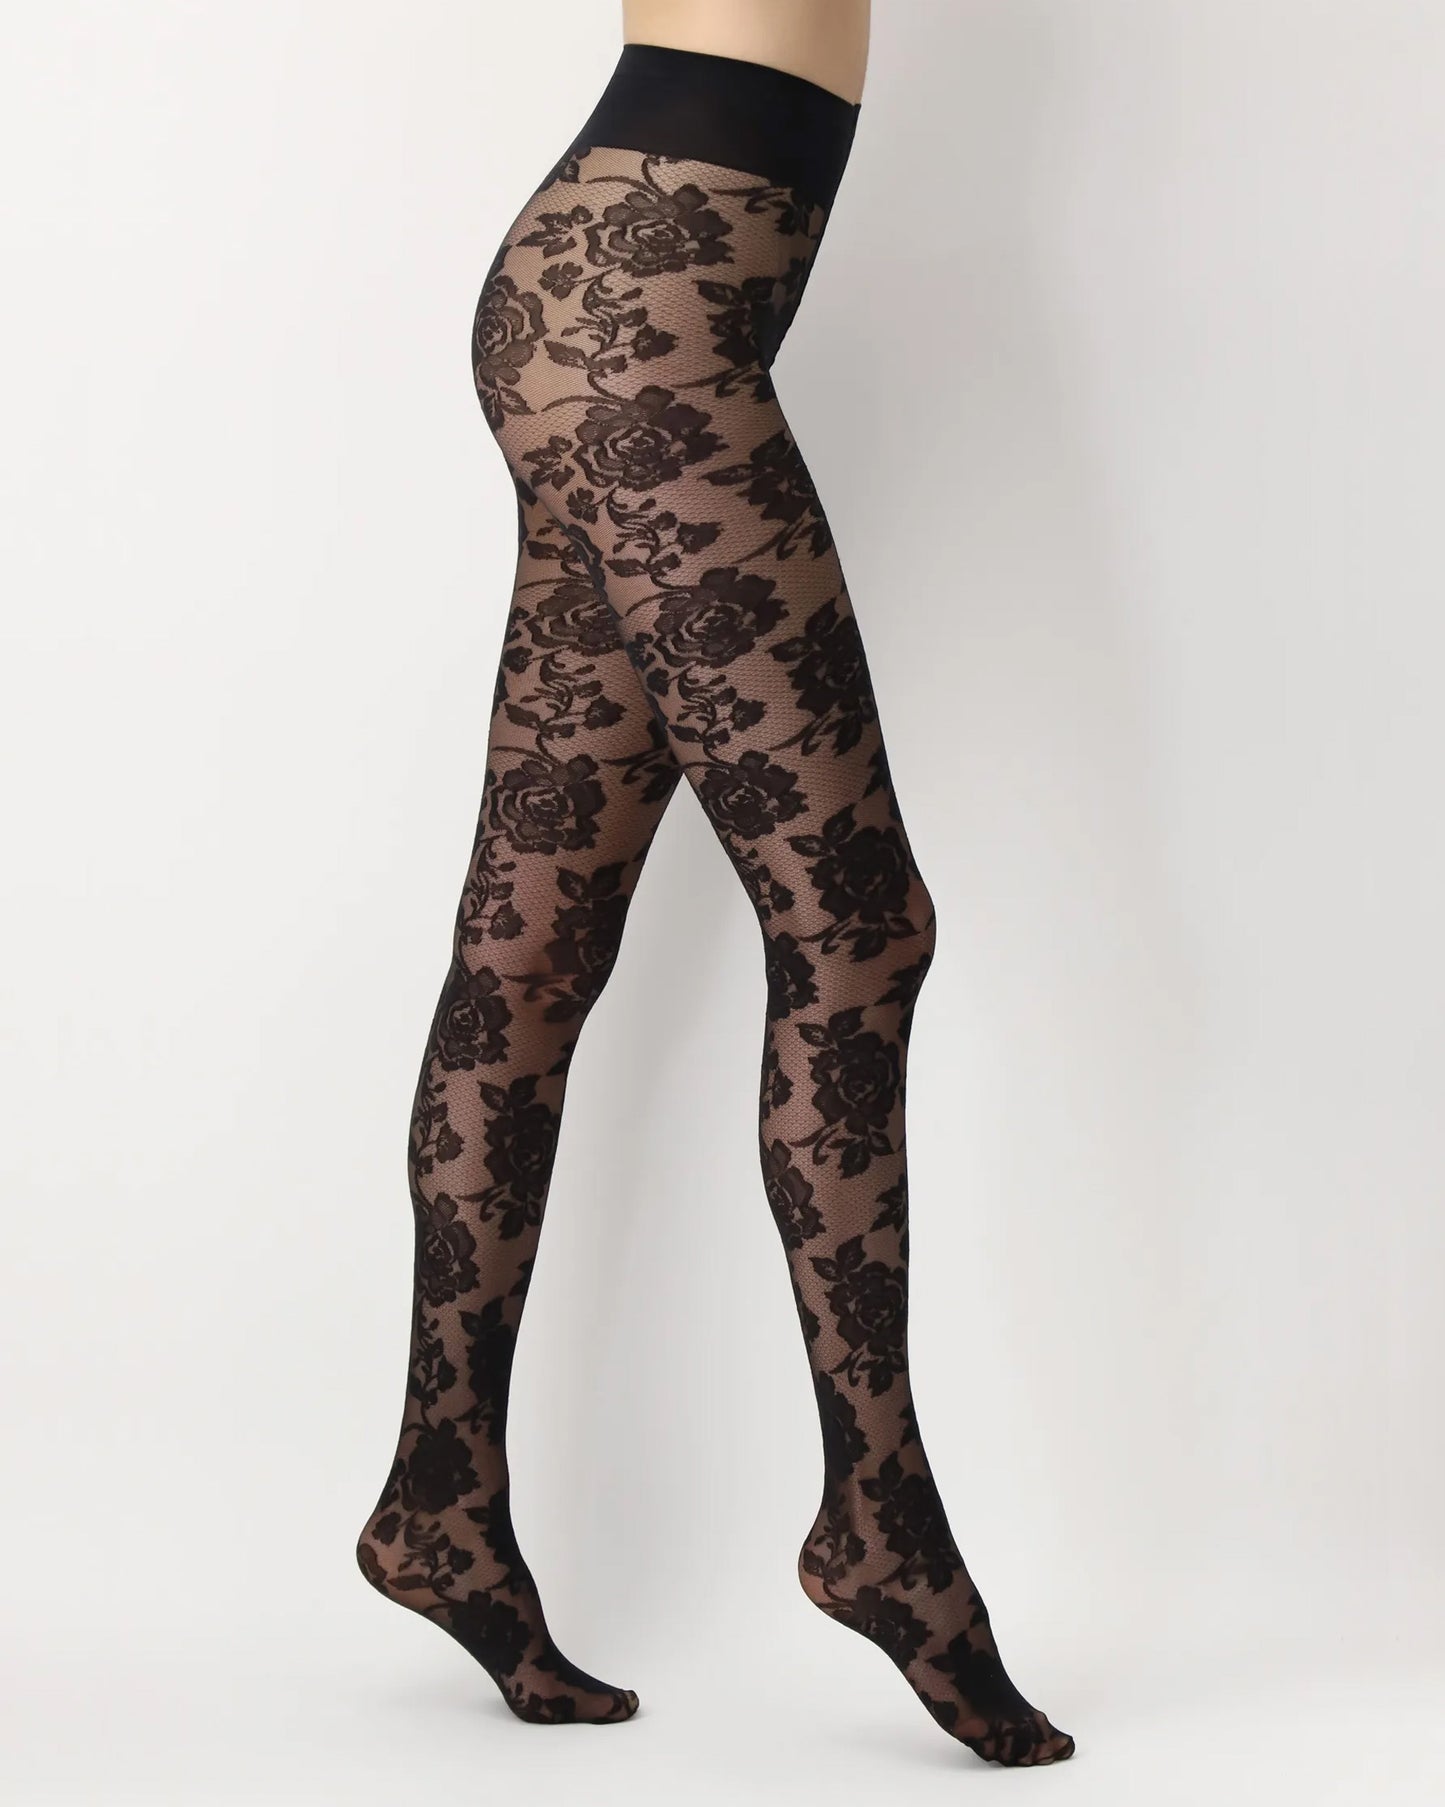 OroblÌ_ All Colors Lace Tights - Black floral lace style fashion tights with a deep comfort waistband.